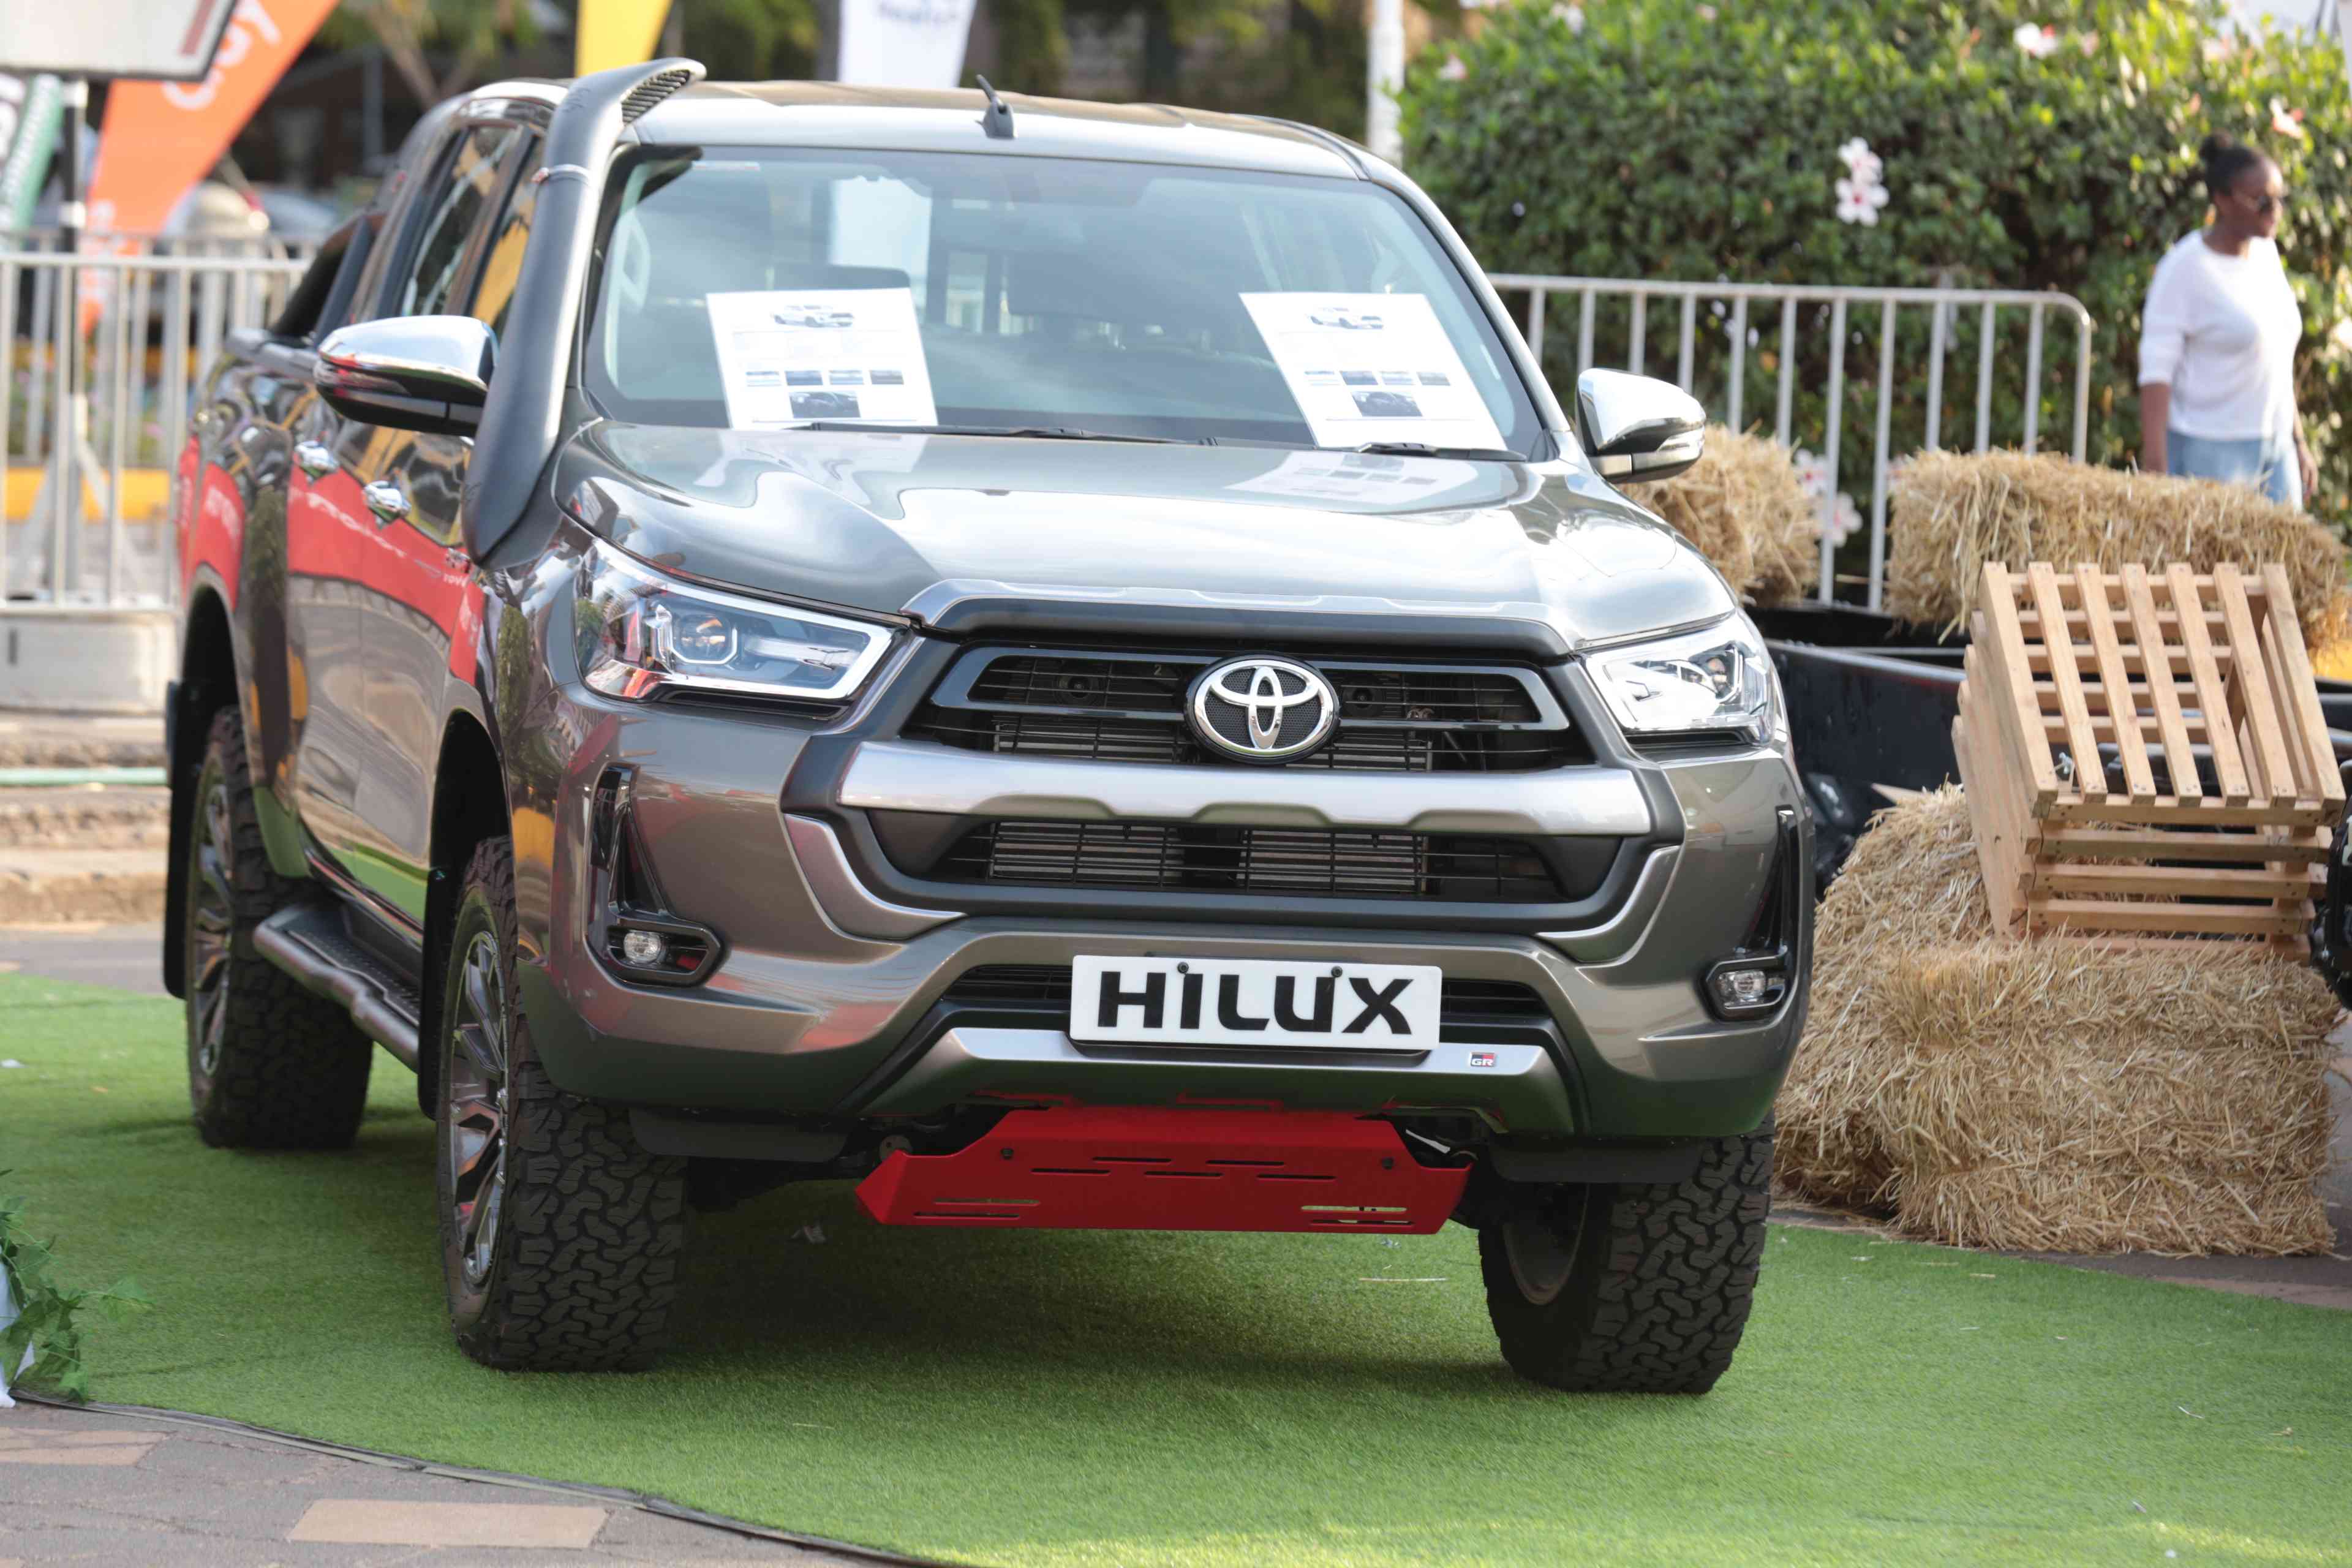 The all new Toyota Hilux on display